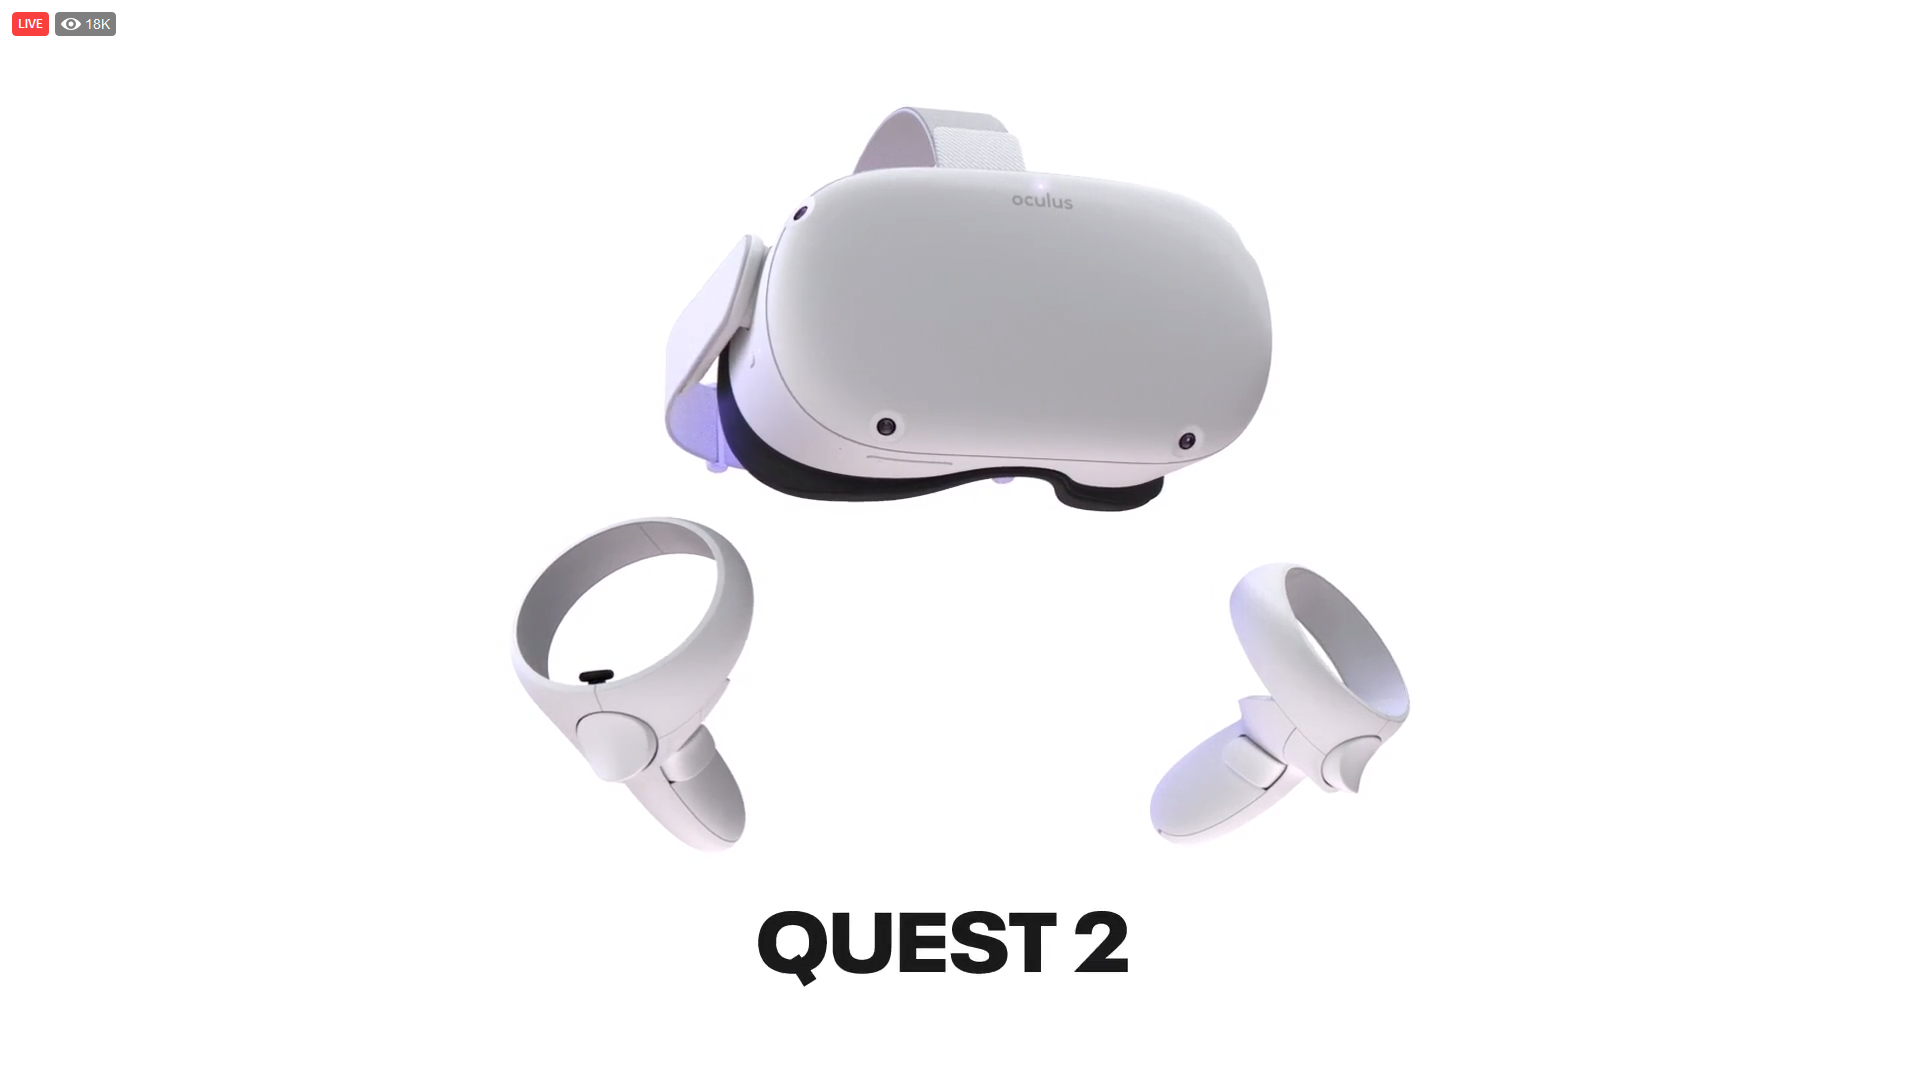 Oculus Quest 2 accessories detailed, includes fit pack & battery pack